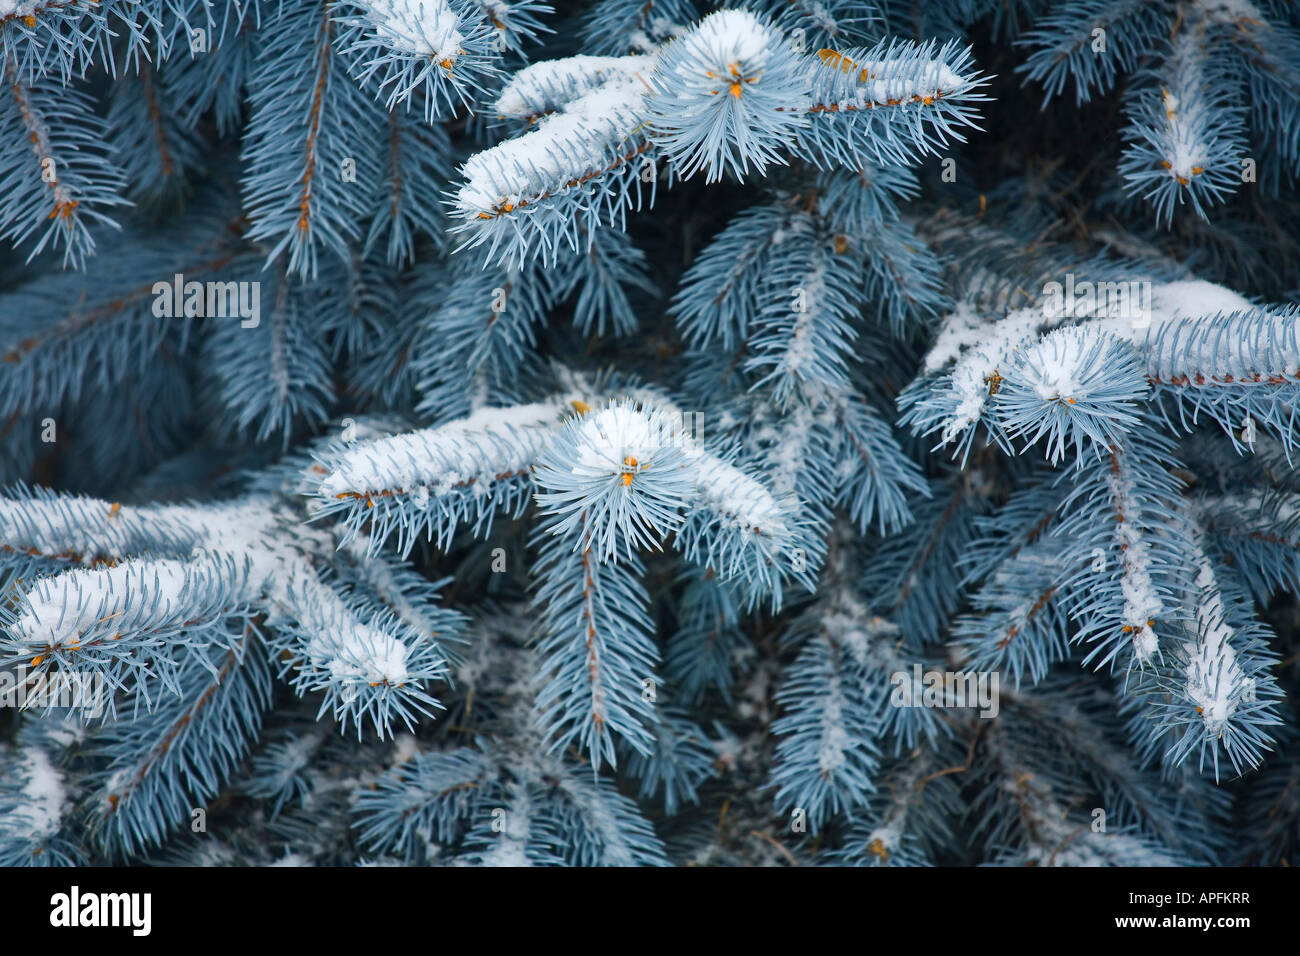 Blue Spruce branches covered in snow Stock Photo